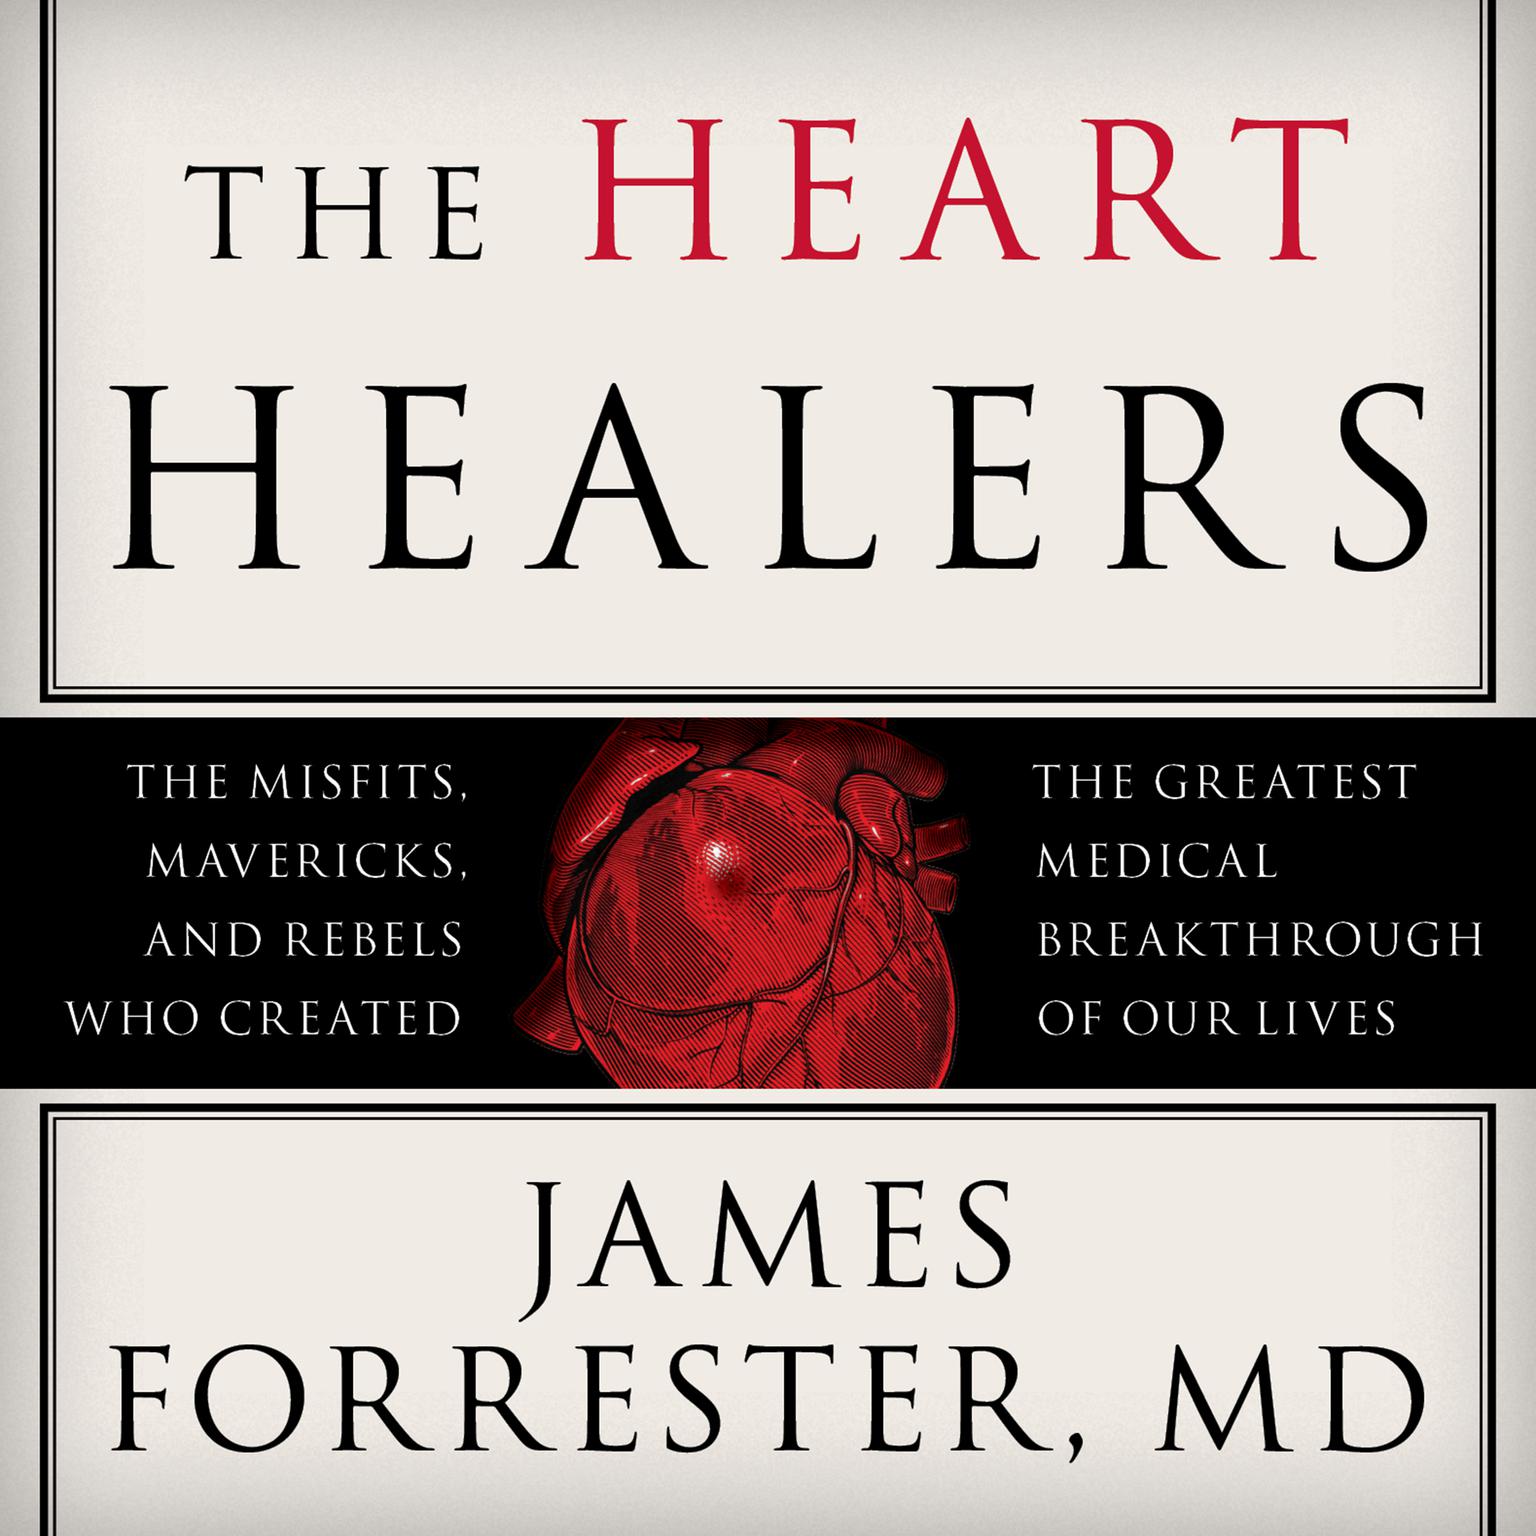 The Heart Healers: The Misfits, Mavericks, and Rebels Who Created the Greatest Medical Breakthrough of Our Lives Audiobook, by James Forrester